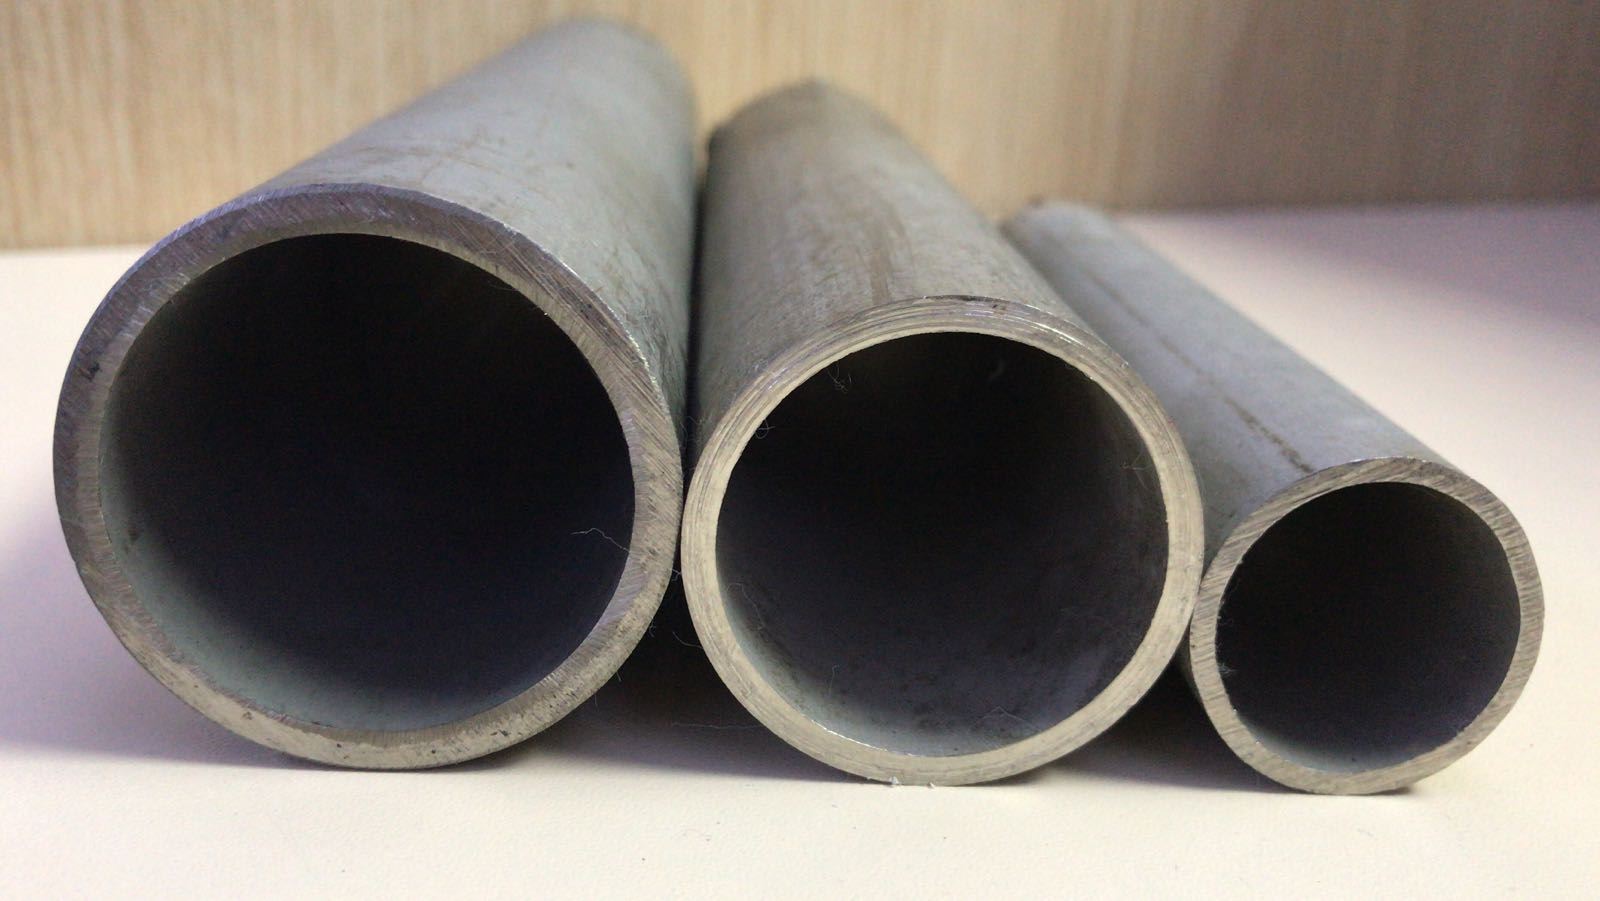 A slight recovery is expected in China's seamless pipe market